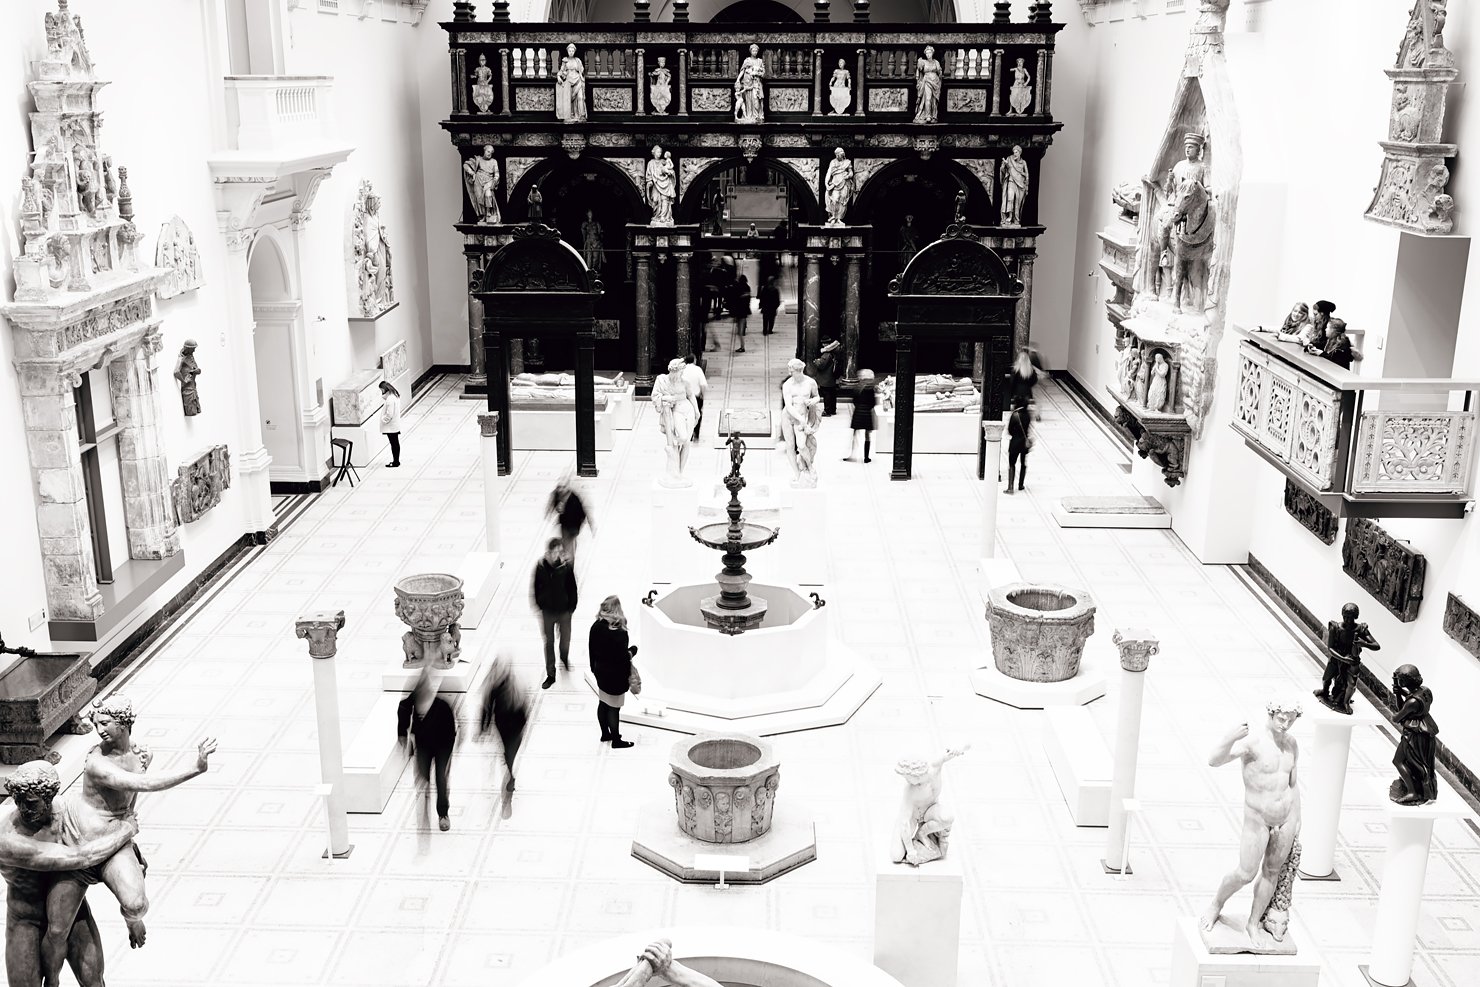 V&A (Victoria and Albert) Museum in London in Black & White